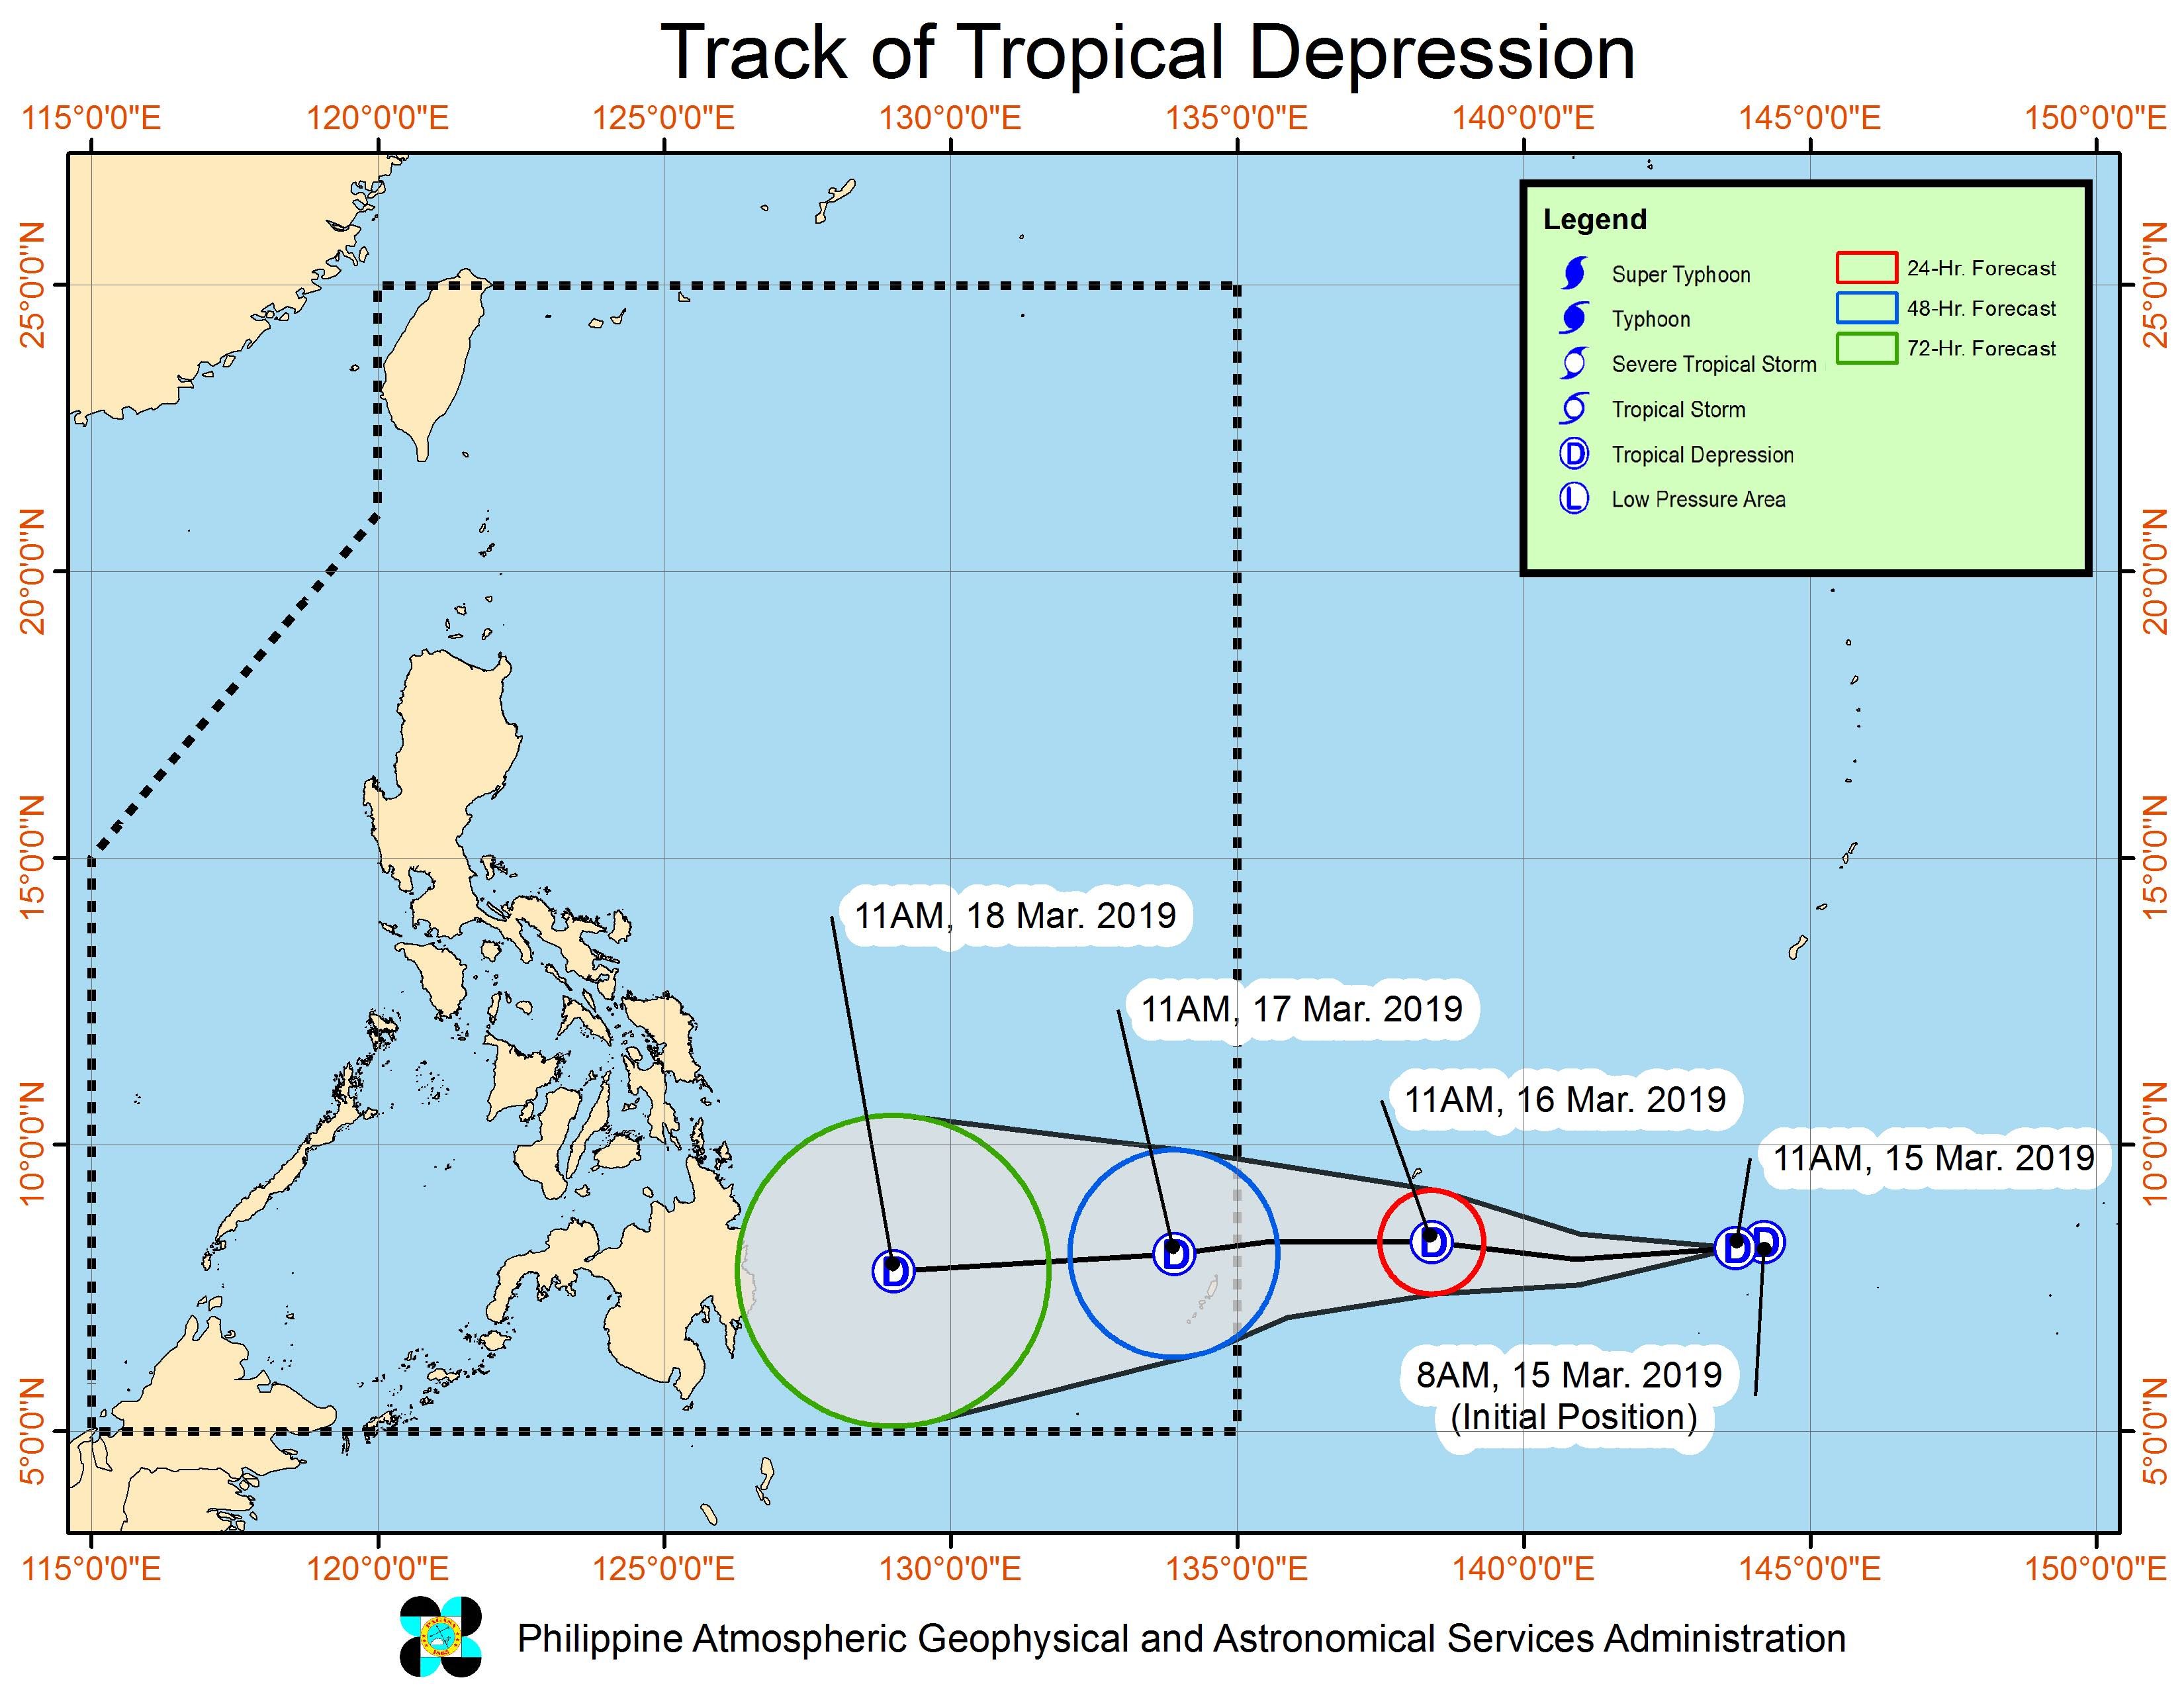 Forecast track of the tropical depression as of March 16, 2019, 11 am. Image from PAGASA 